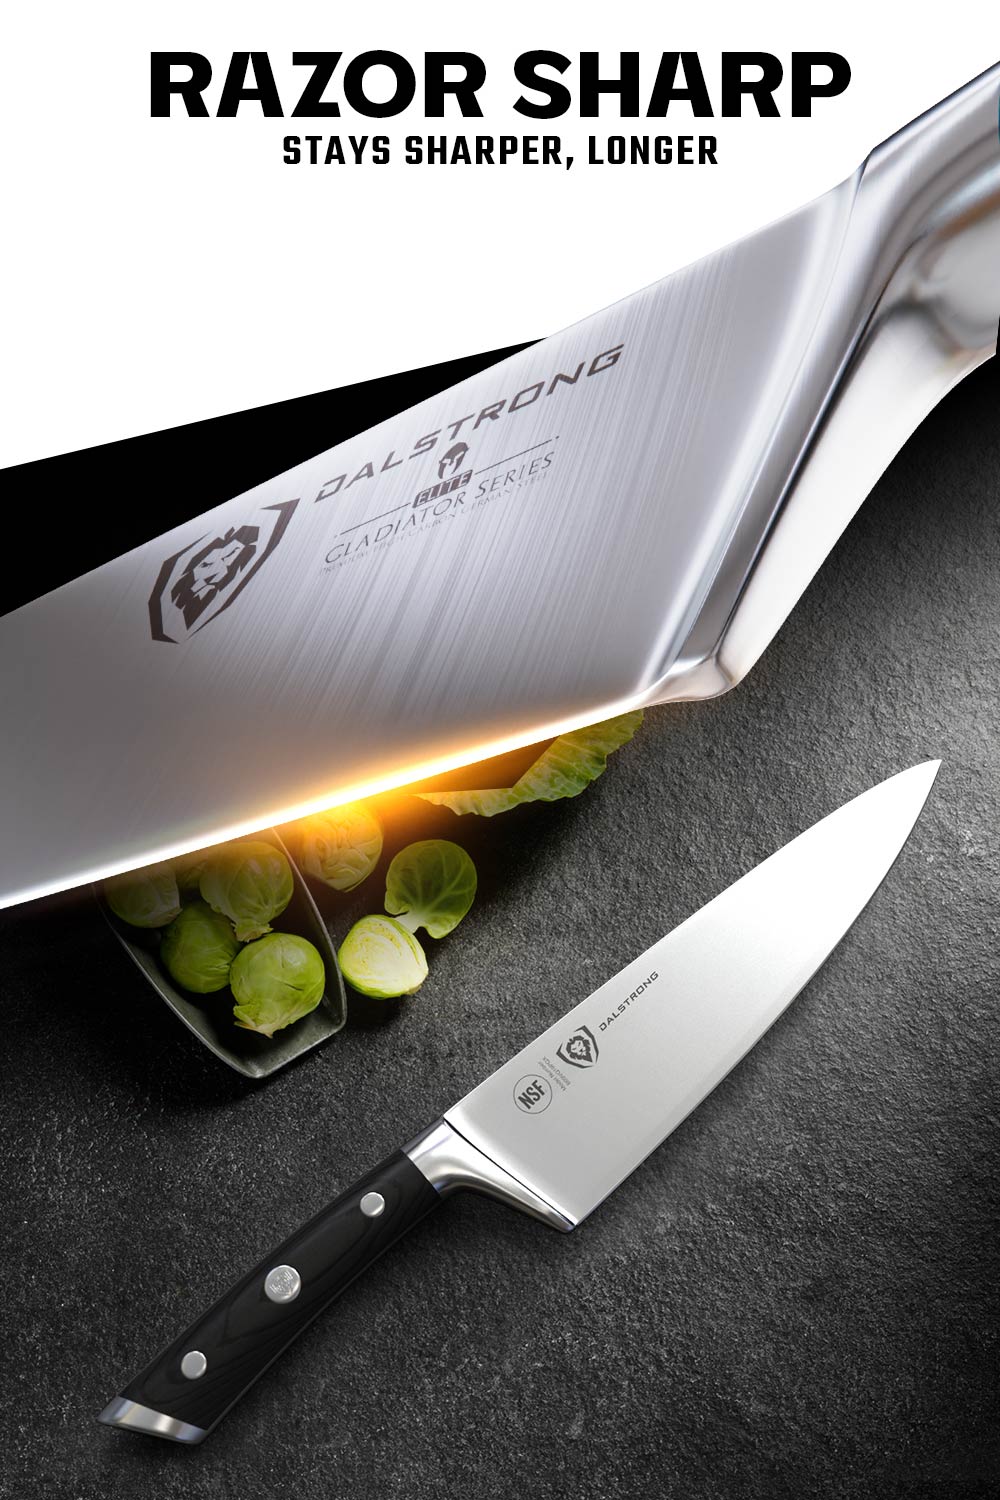 Dalstrong gladiator series 8 inch chef knife with black handle featuring it's sharpness.